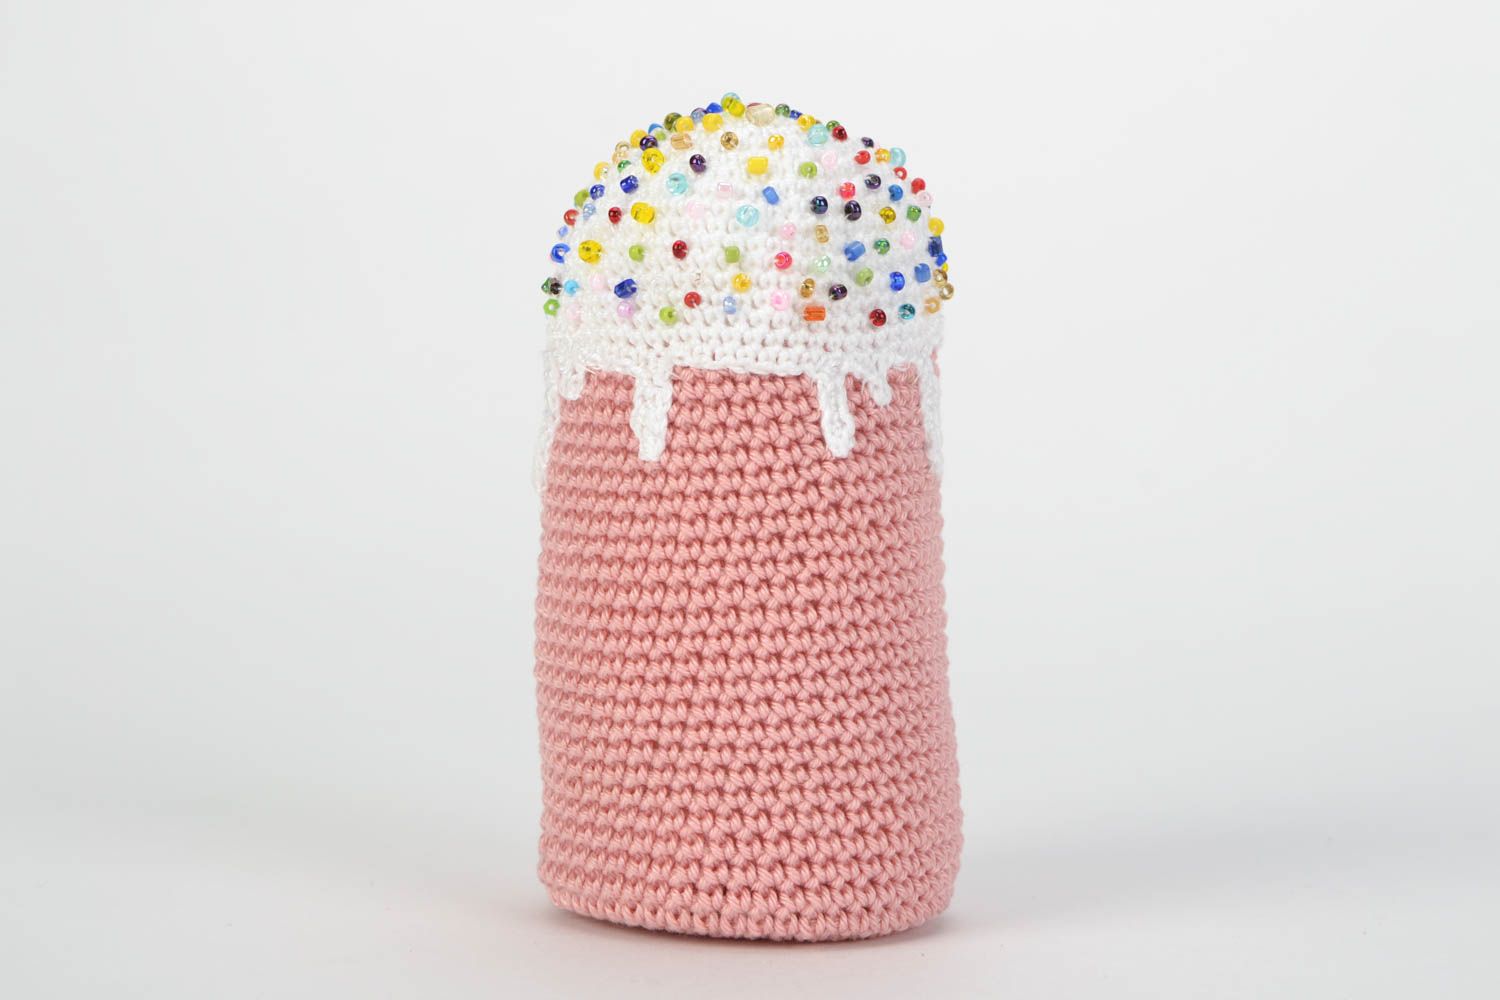 Handmade crochet soft toy in the shape of pink Easter cake decorated with beads photo 3